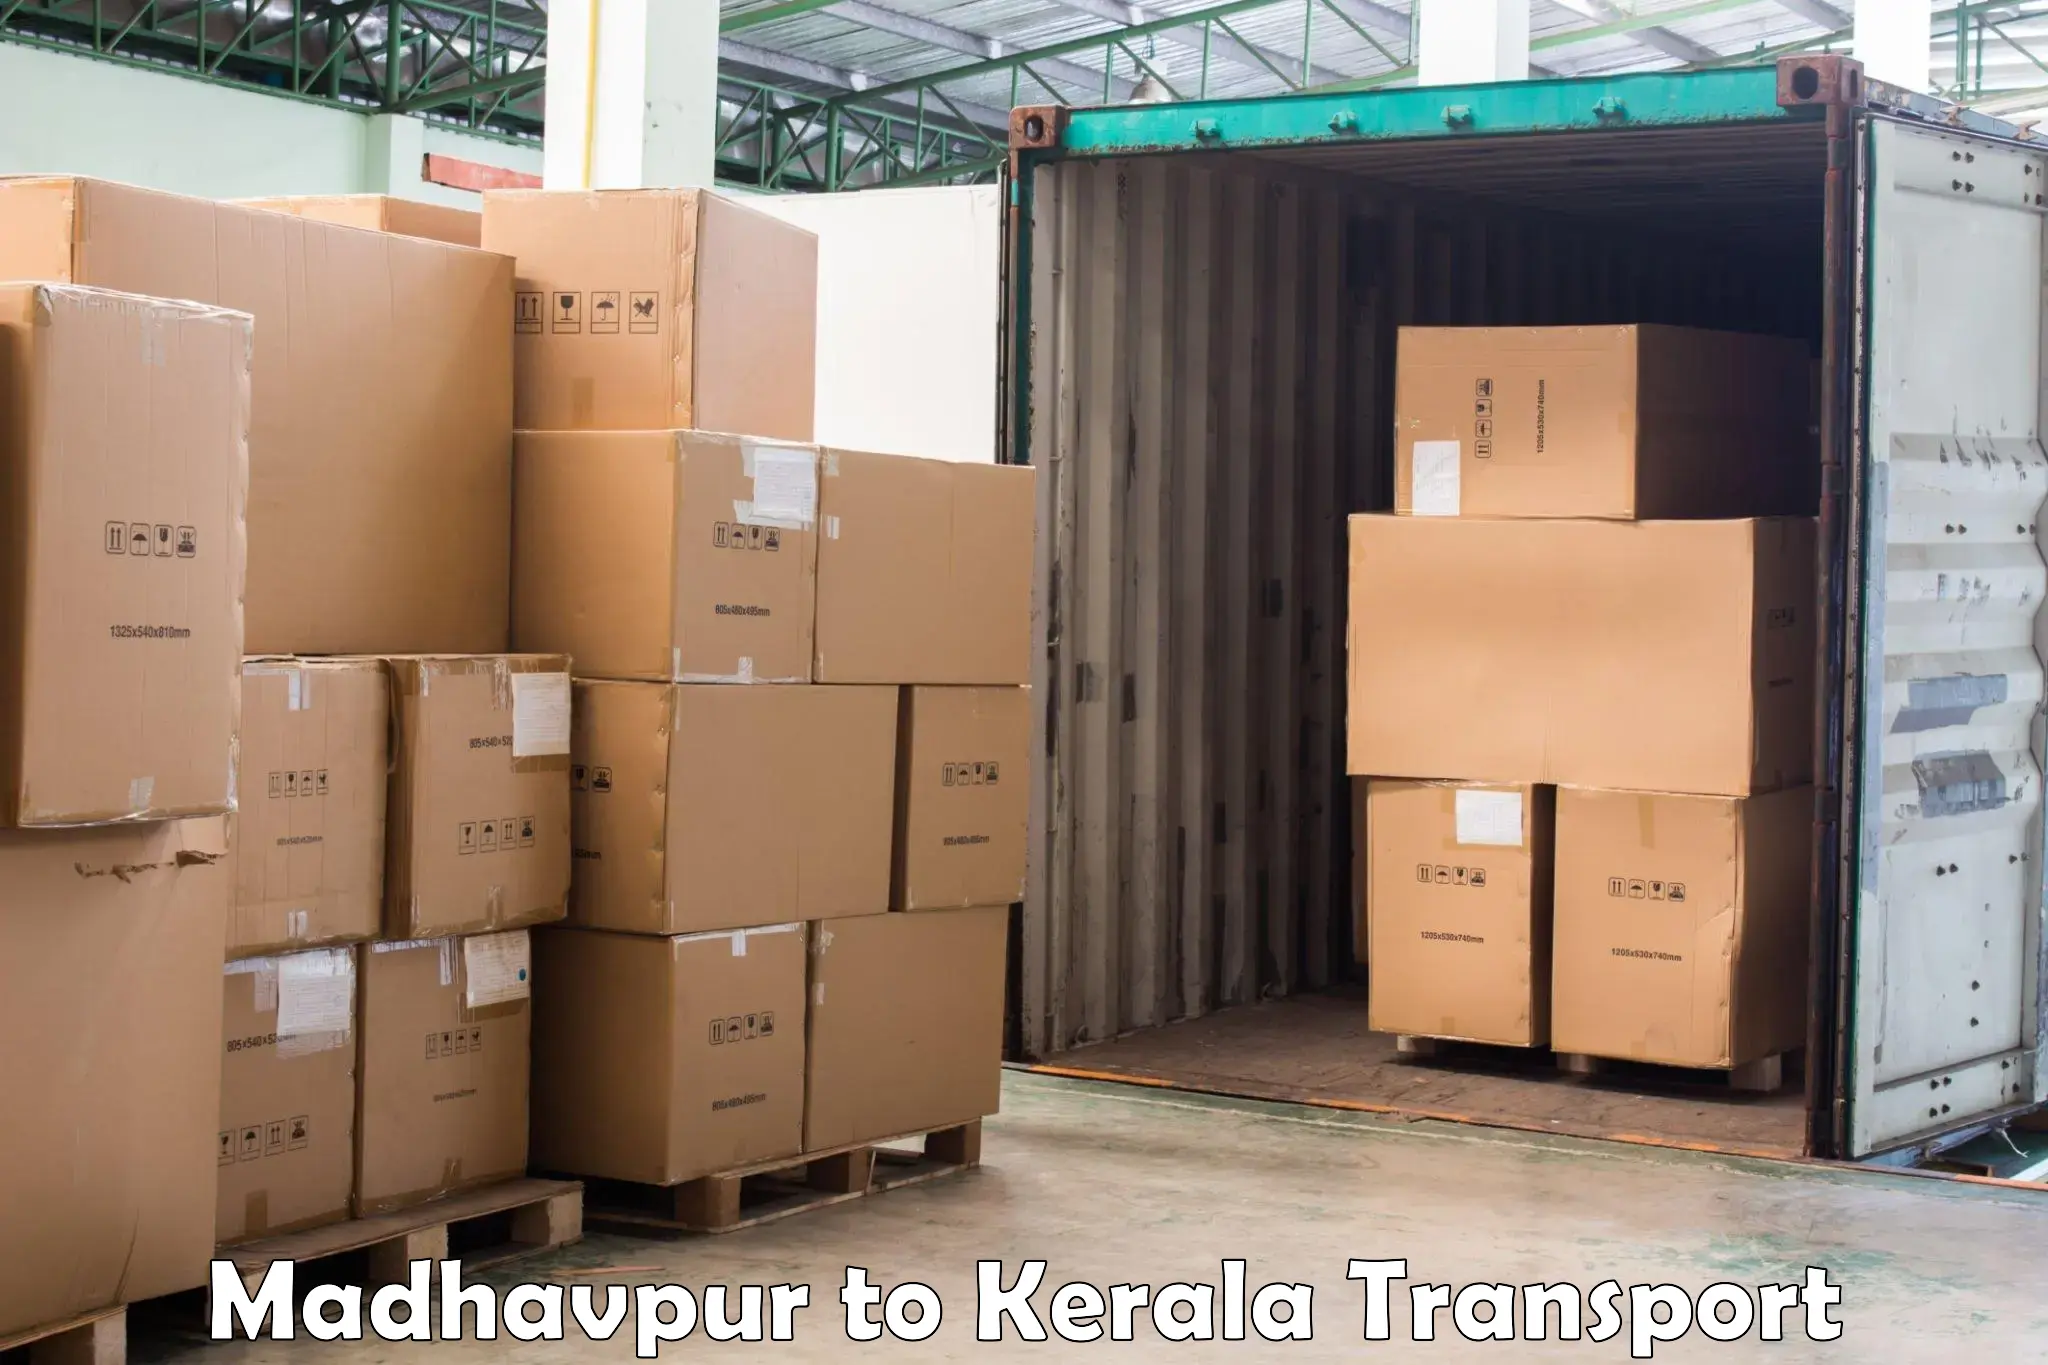 Transport bike from one state to another Madhavpur to Kalpetta